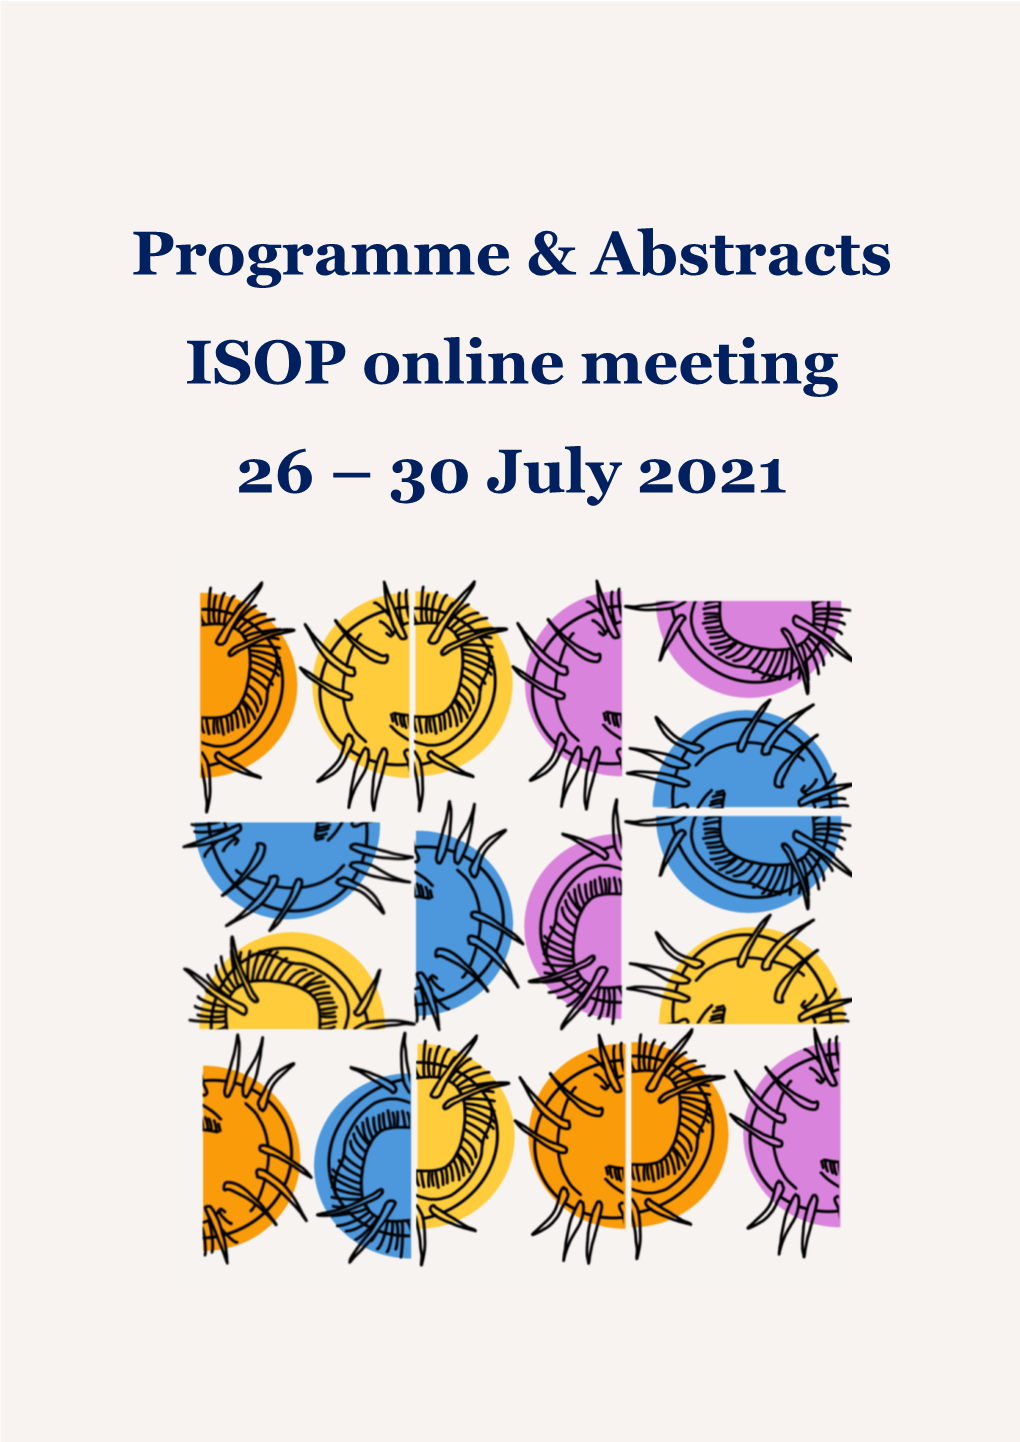 Programme & Abstracts ISOP Online Meeting 26 – 30 July 2021